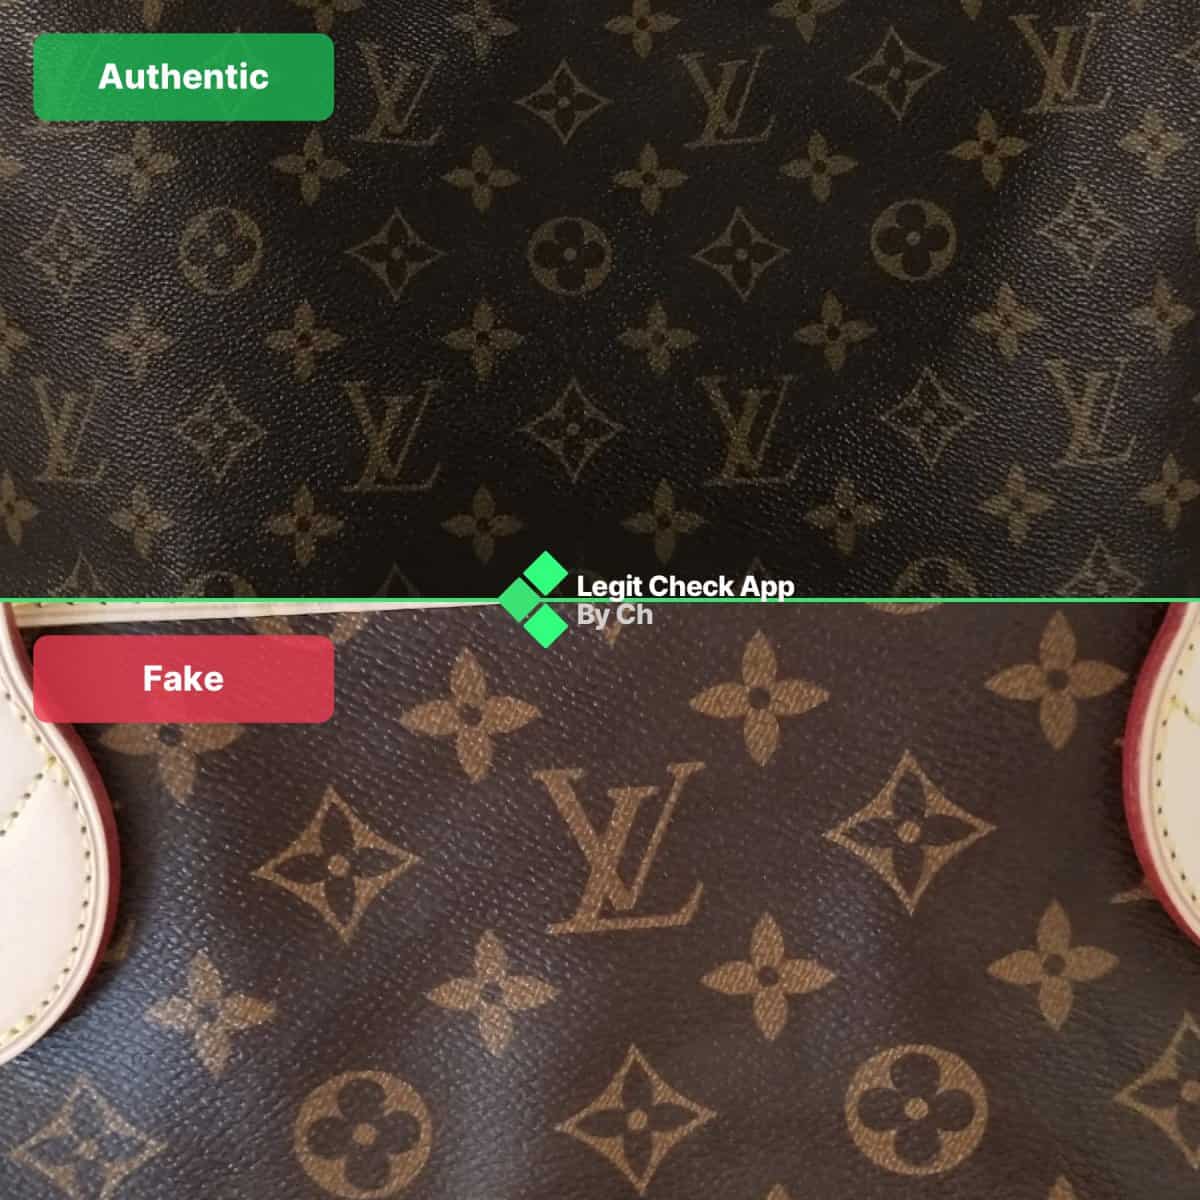 where to buy real louis vuitton bags